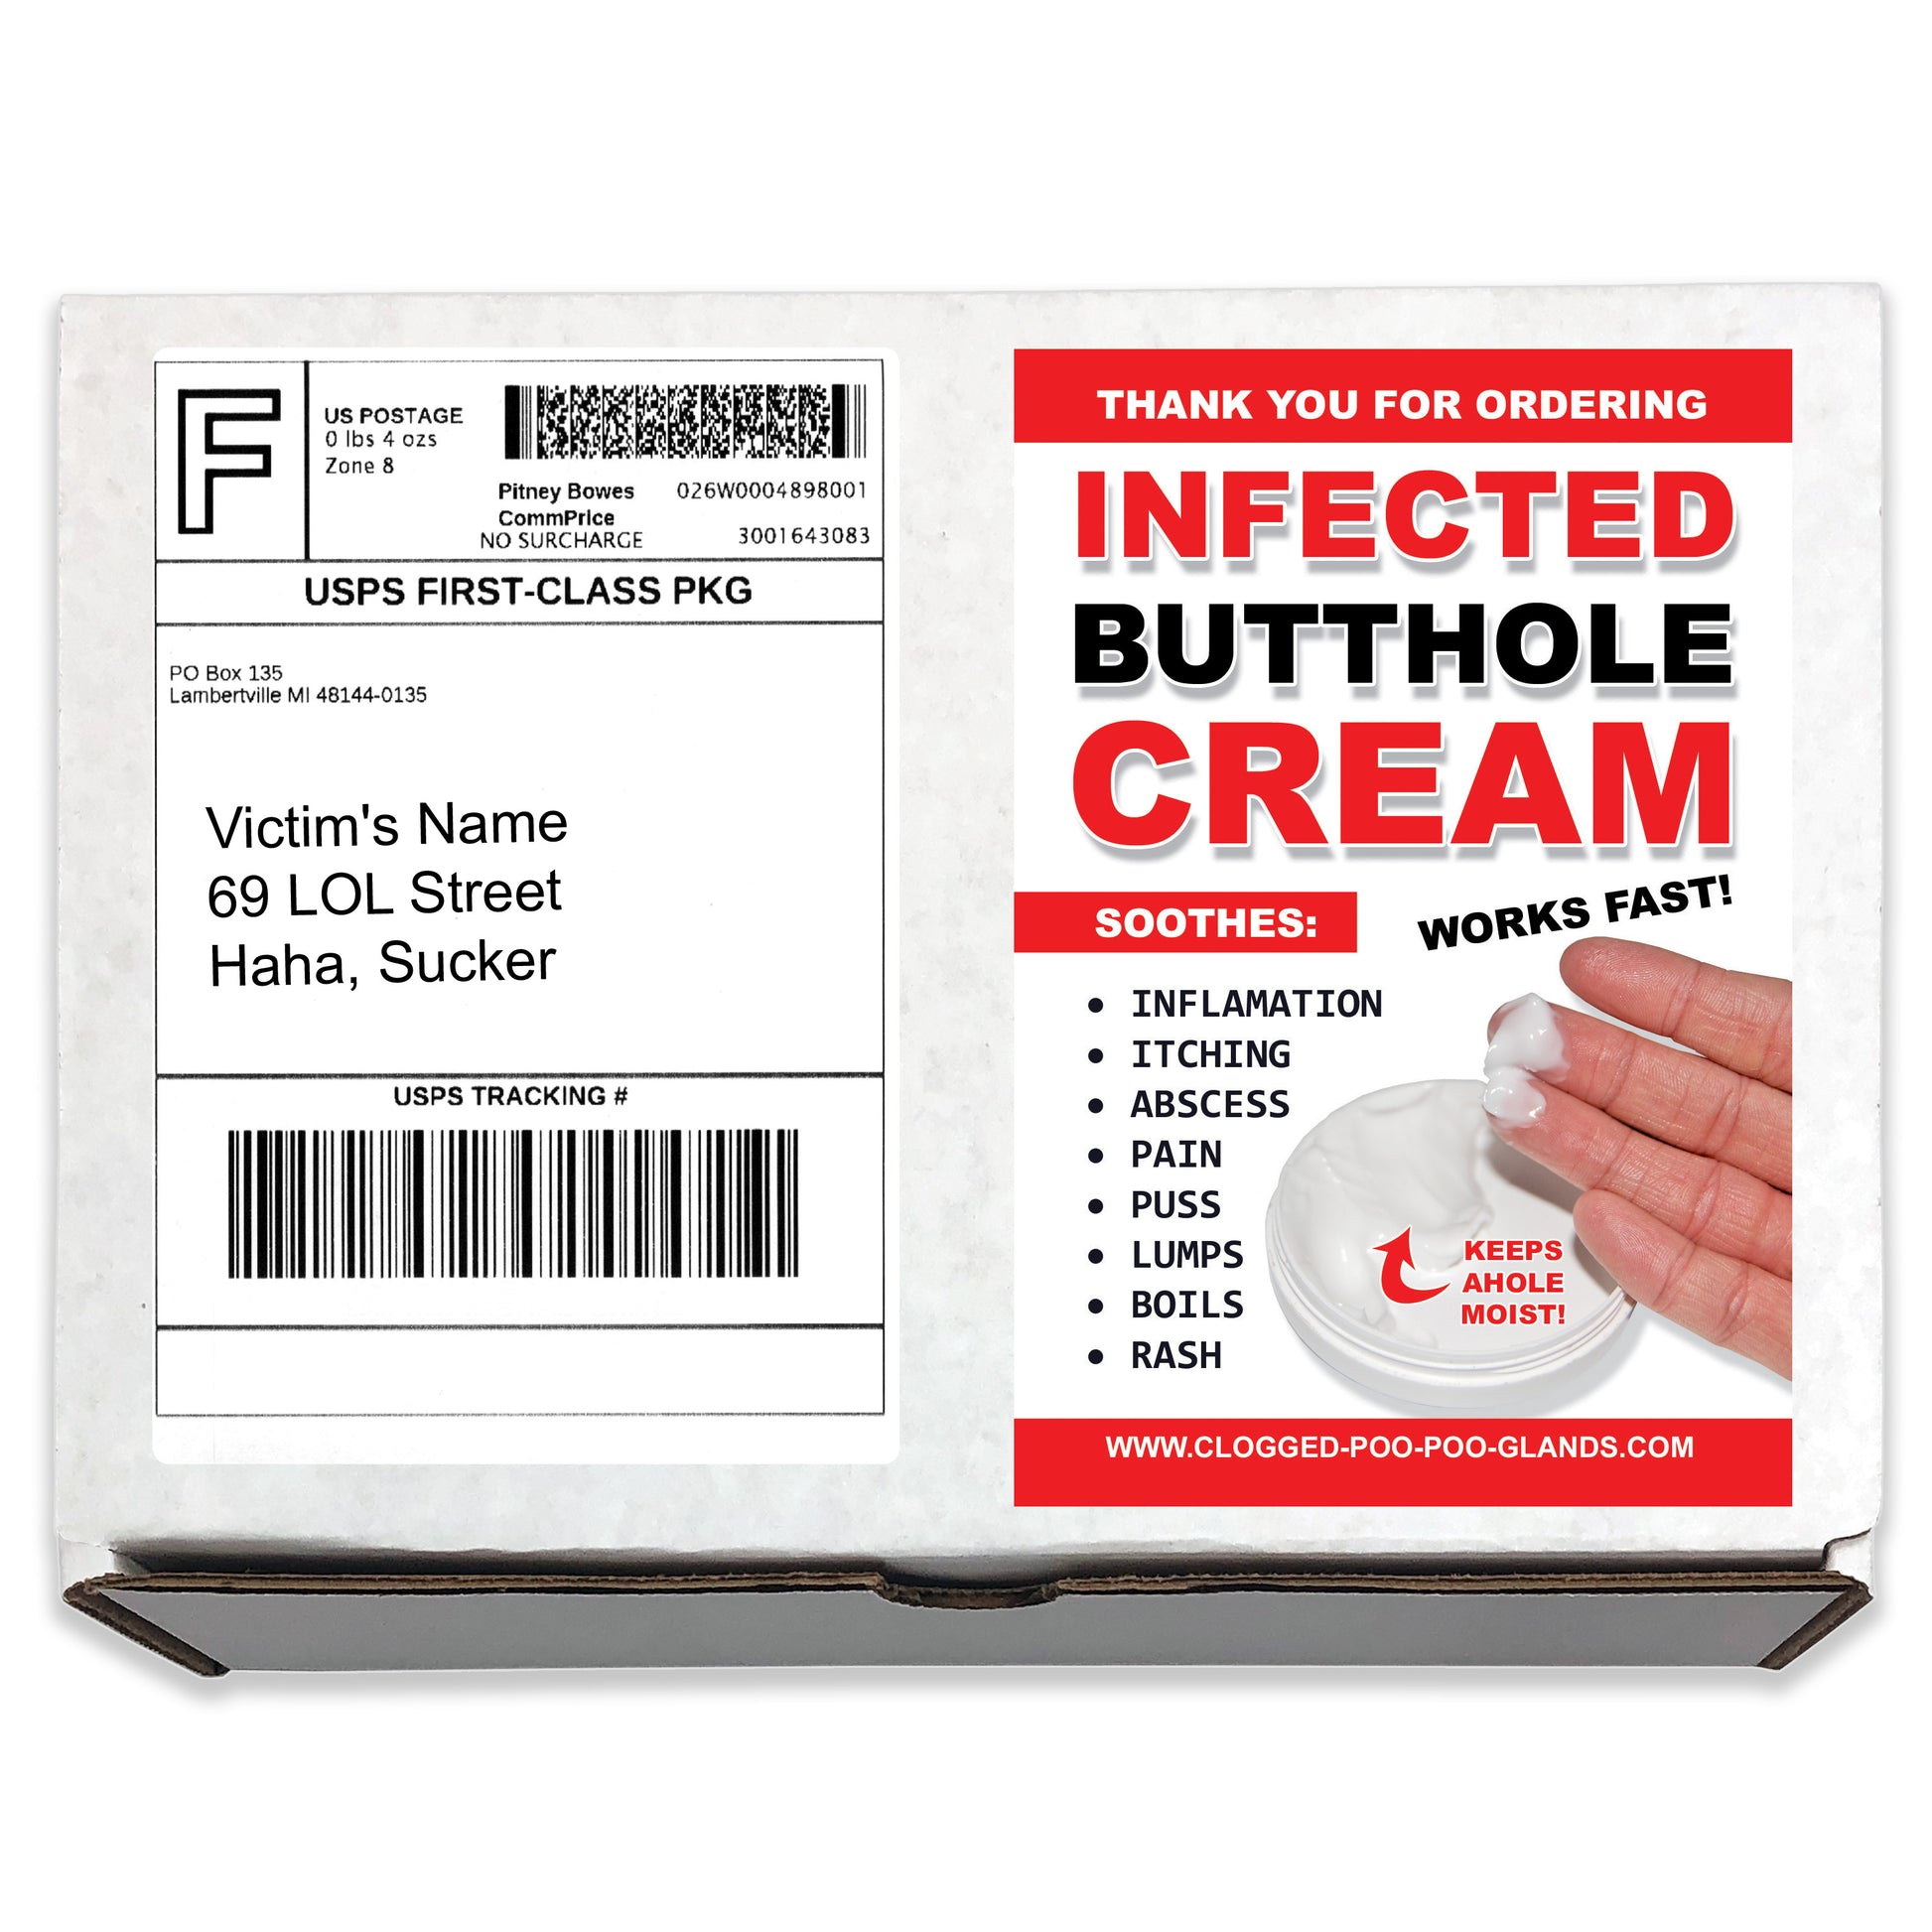 Infected Butthole Cream Prank Box